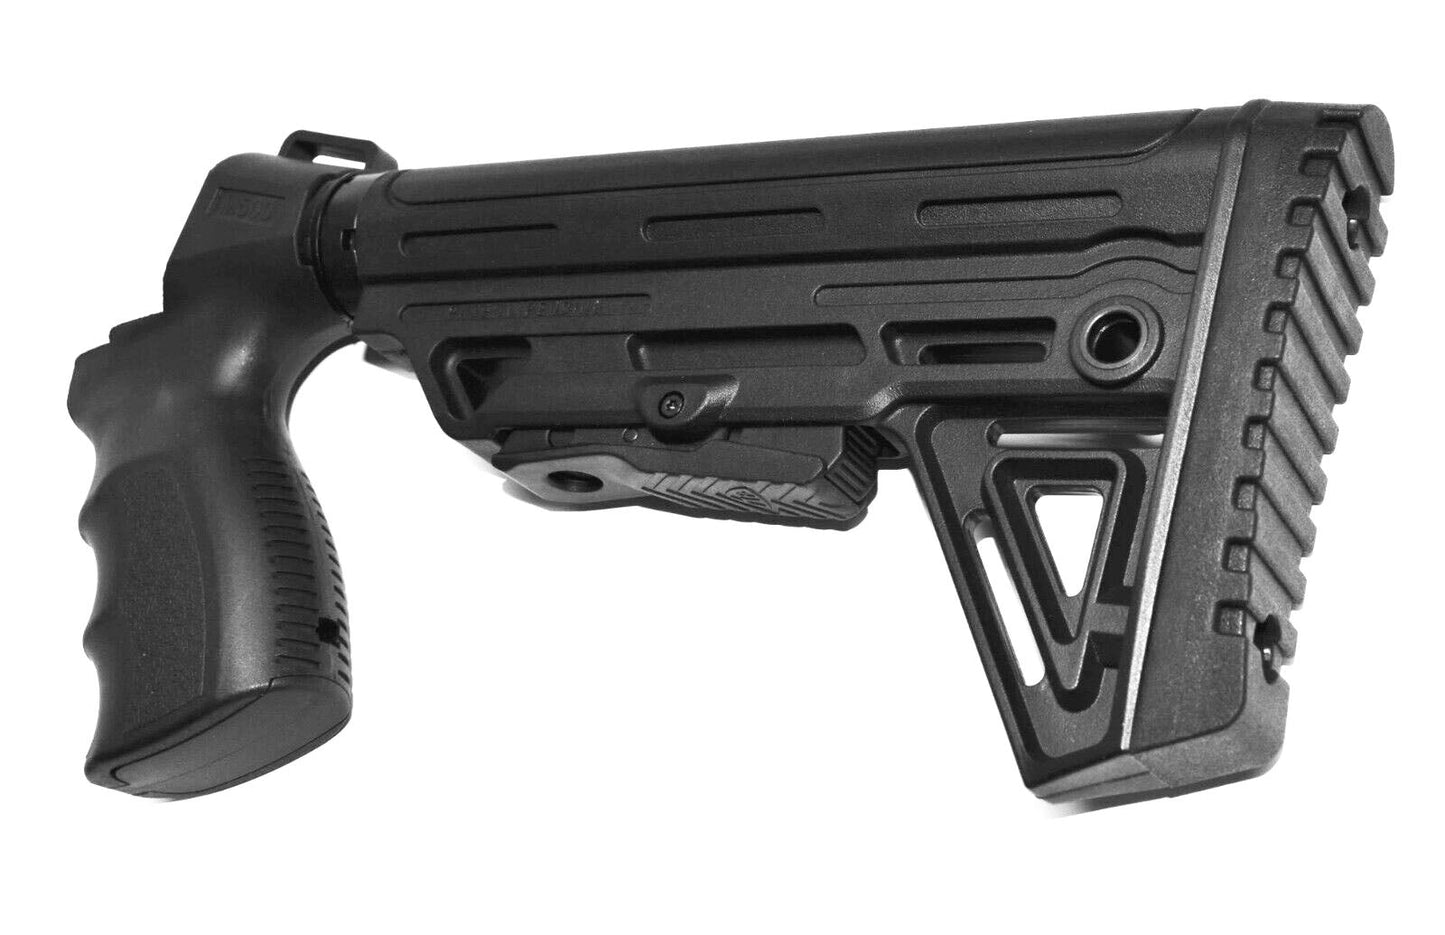 Tactical Fury Stock Compatible With Mossberg 500 20 Gauge Pump. - TRINITY SUPPLY INC